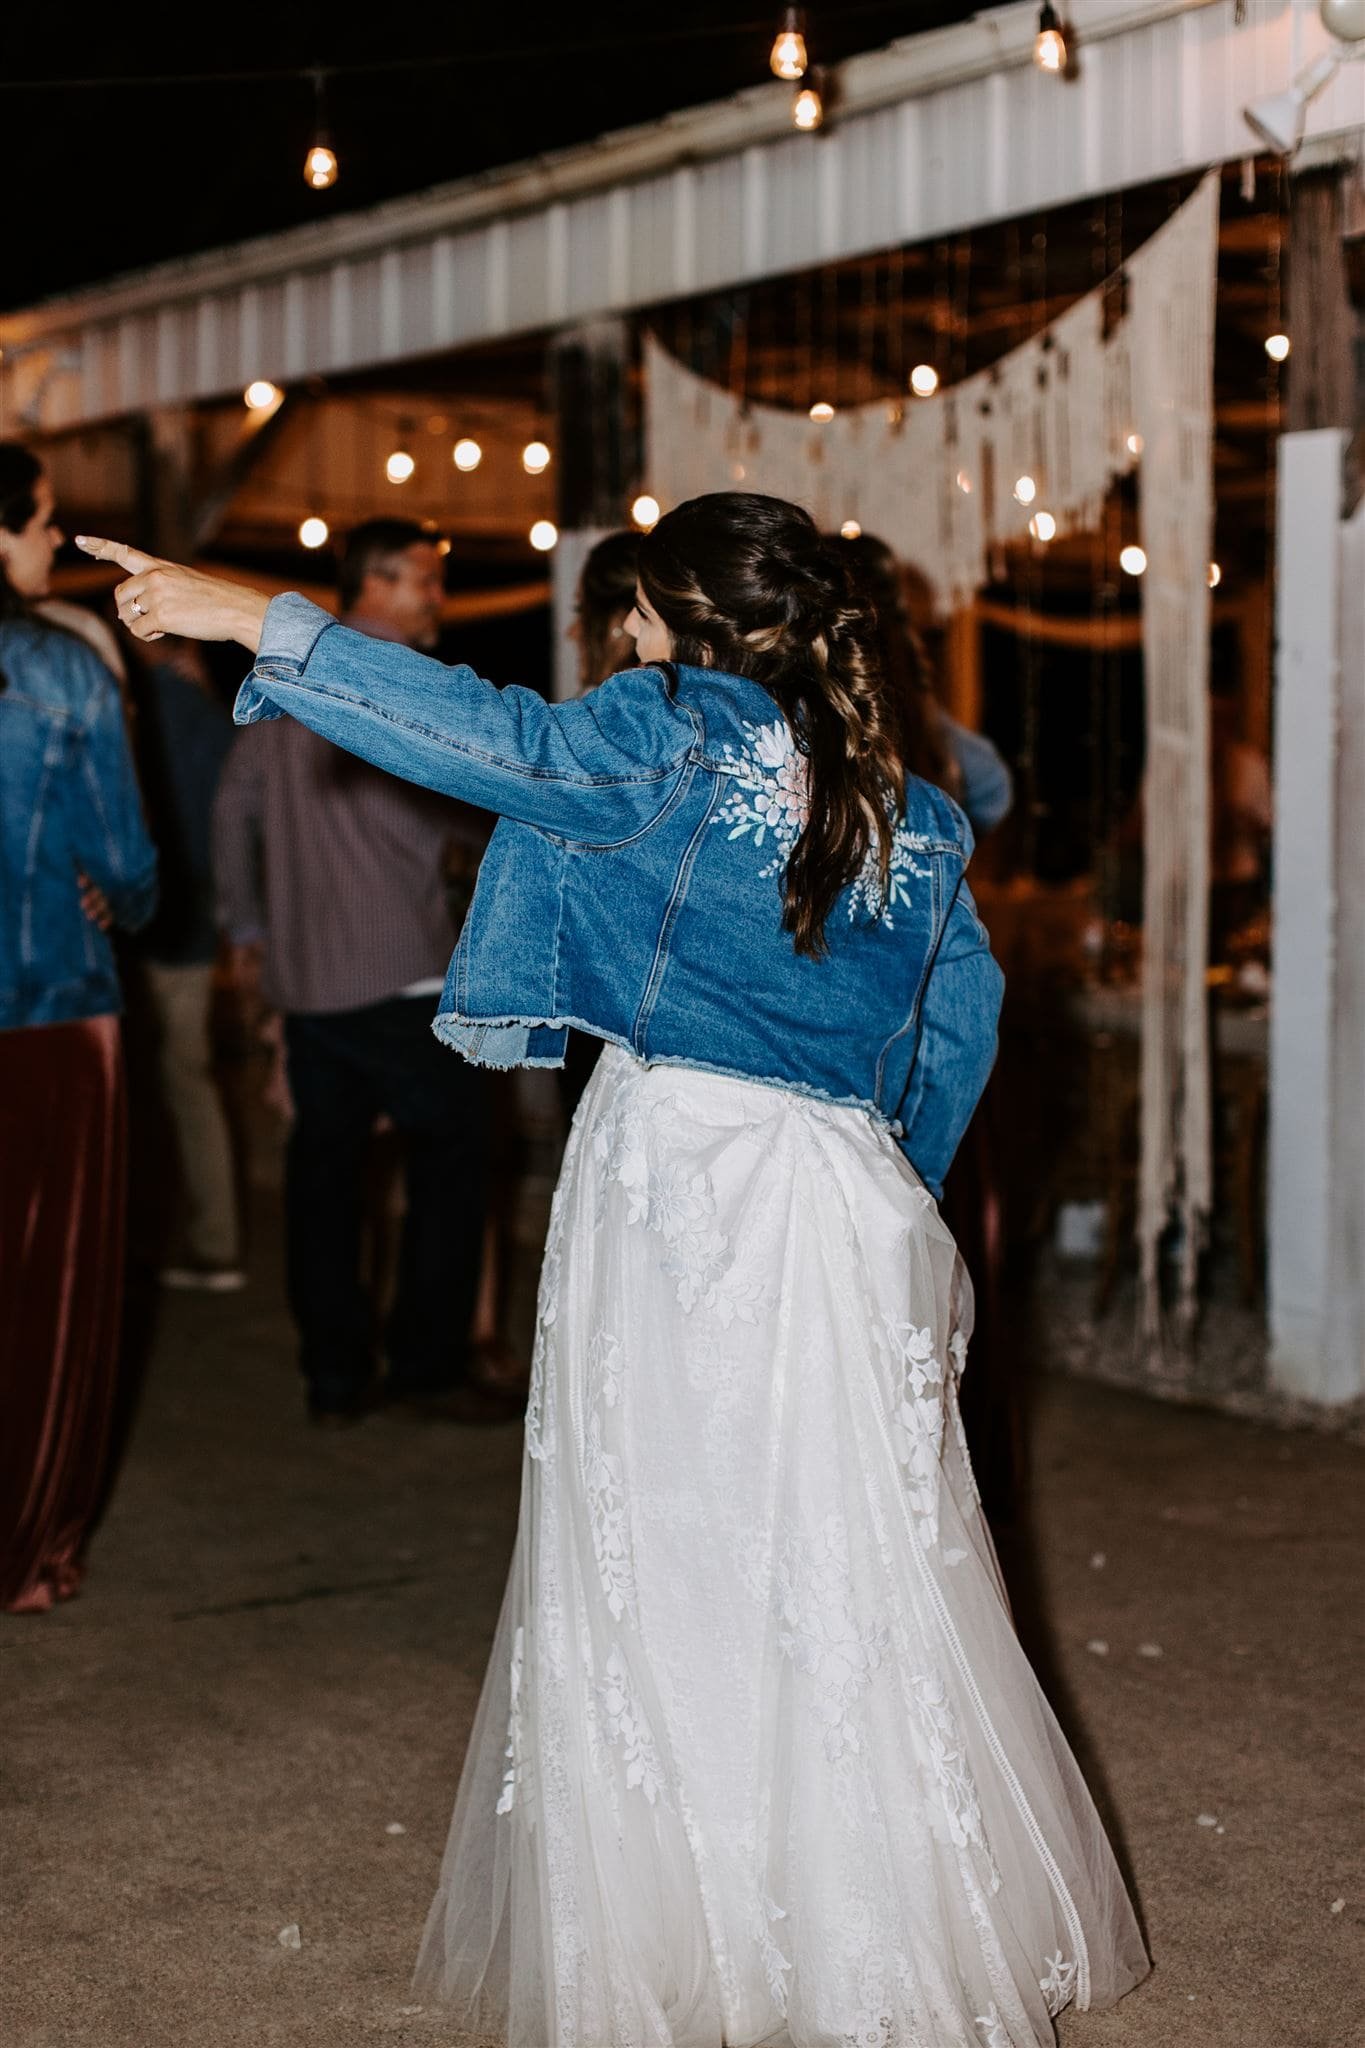  hannah points to something off camera during her wedding reception 